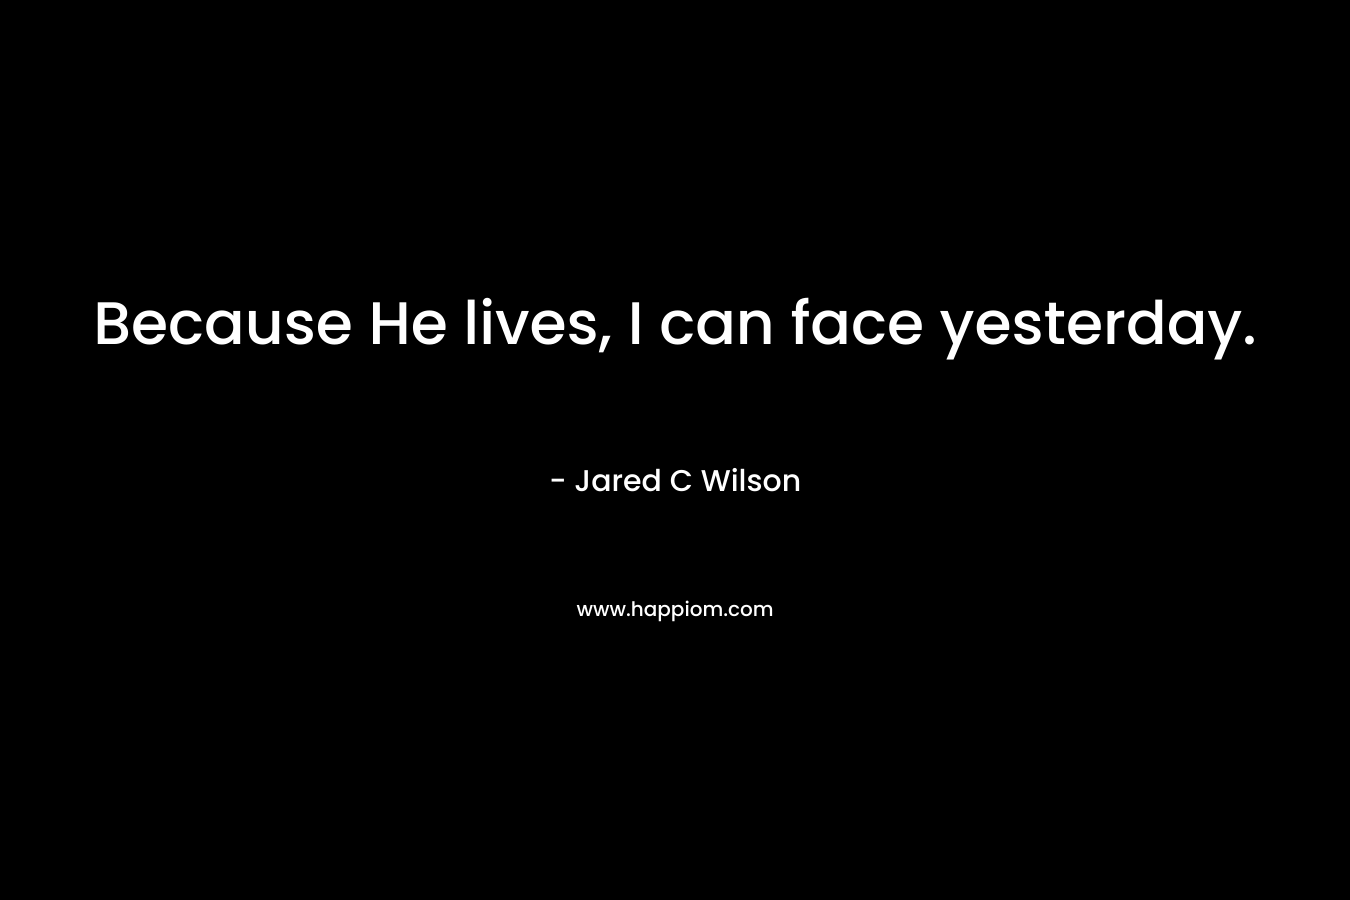 Because He lives, I can face yesterday.